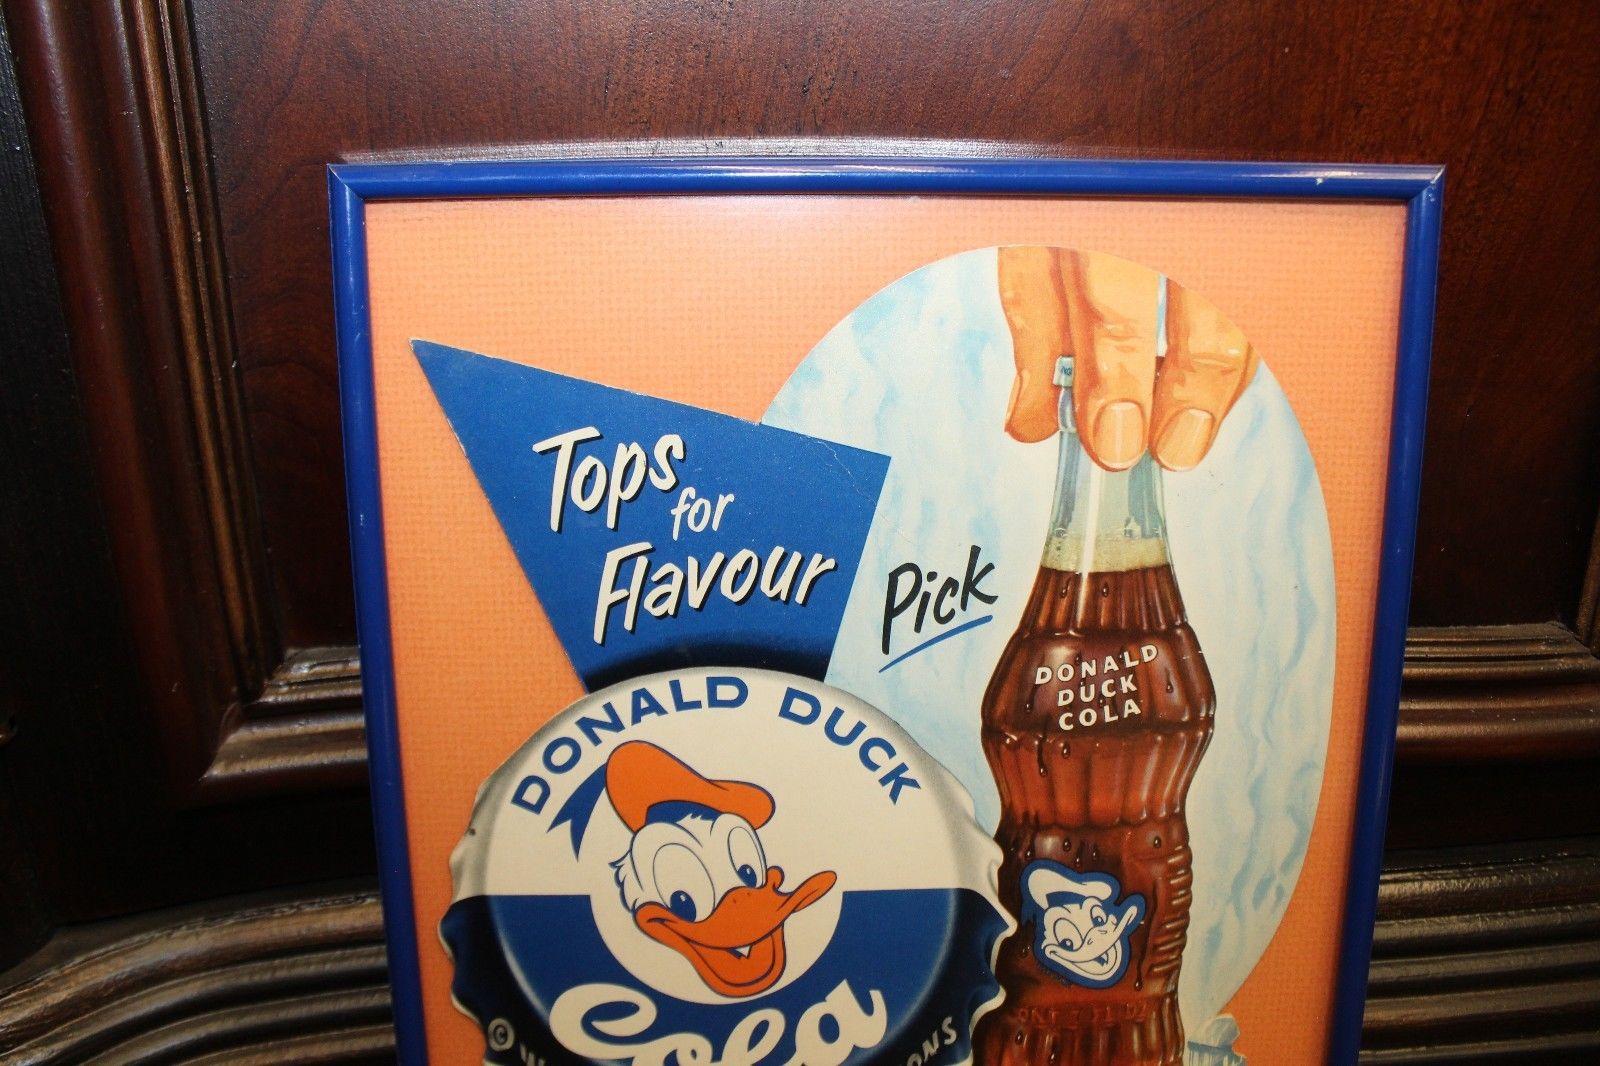 Original Donald Duck Cola sign from 1950. Die cut cardboard. Marked 